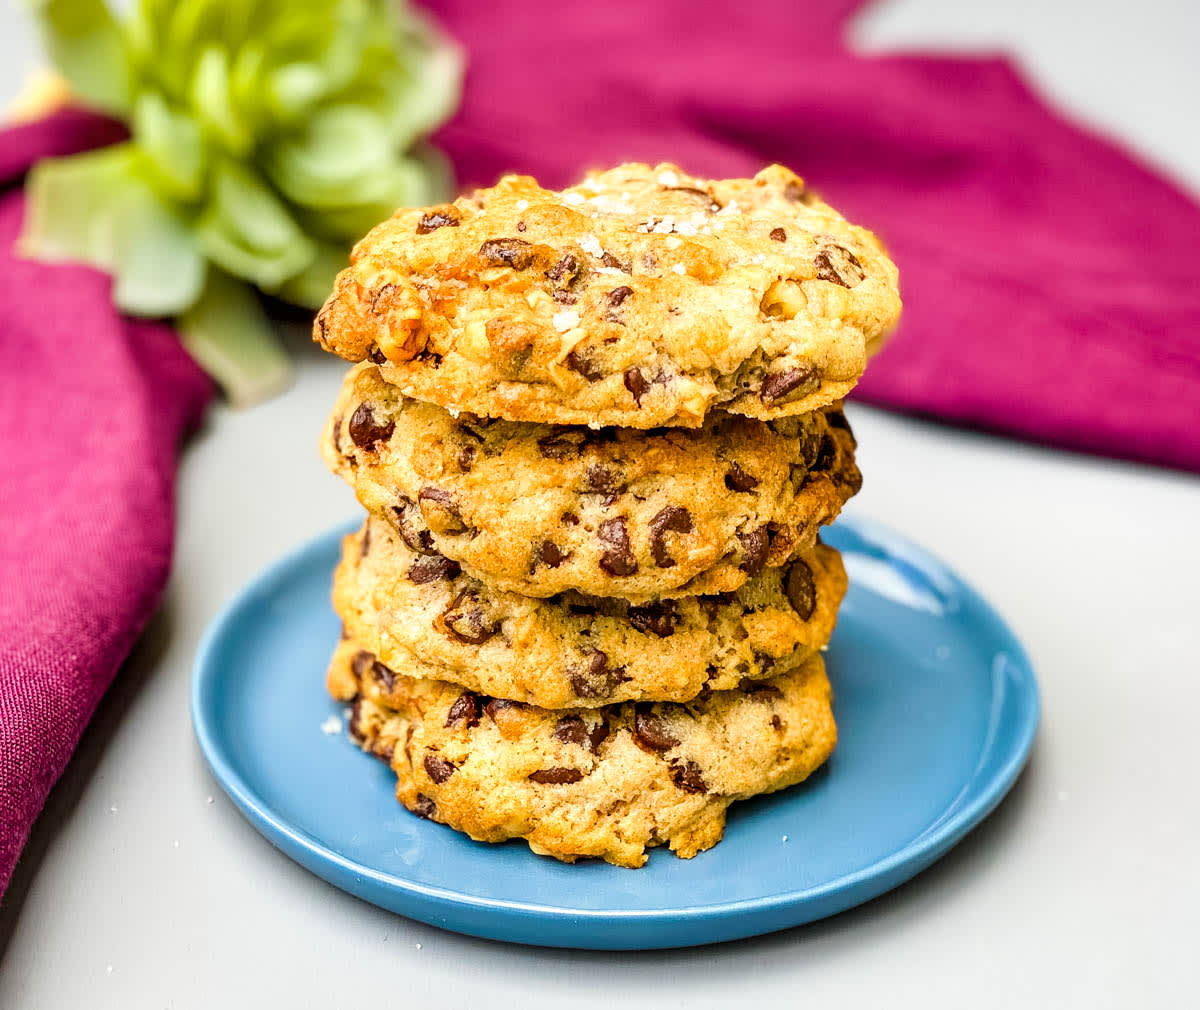 Delicious Air Fryer Chocolate Chip Cookies - The Trellis